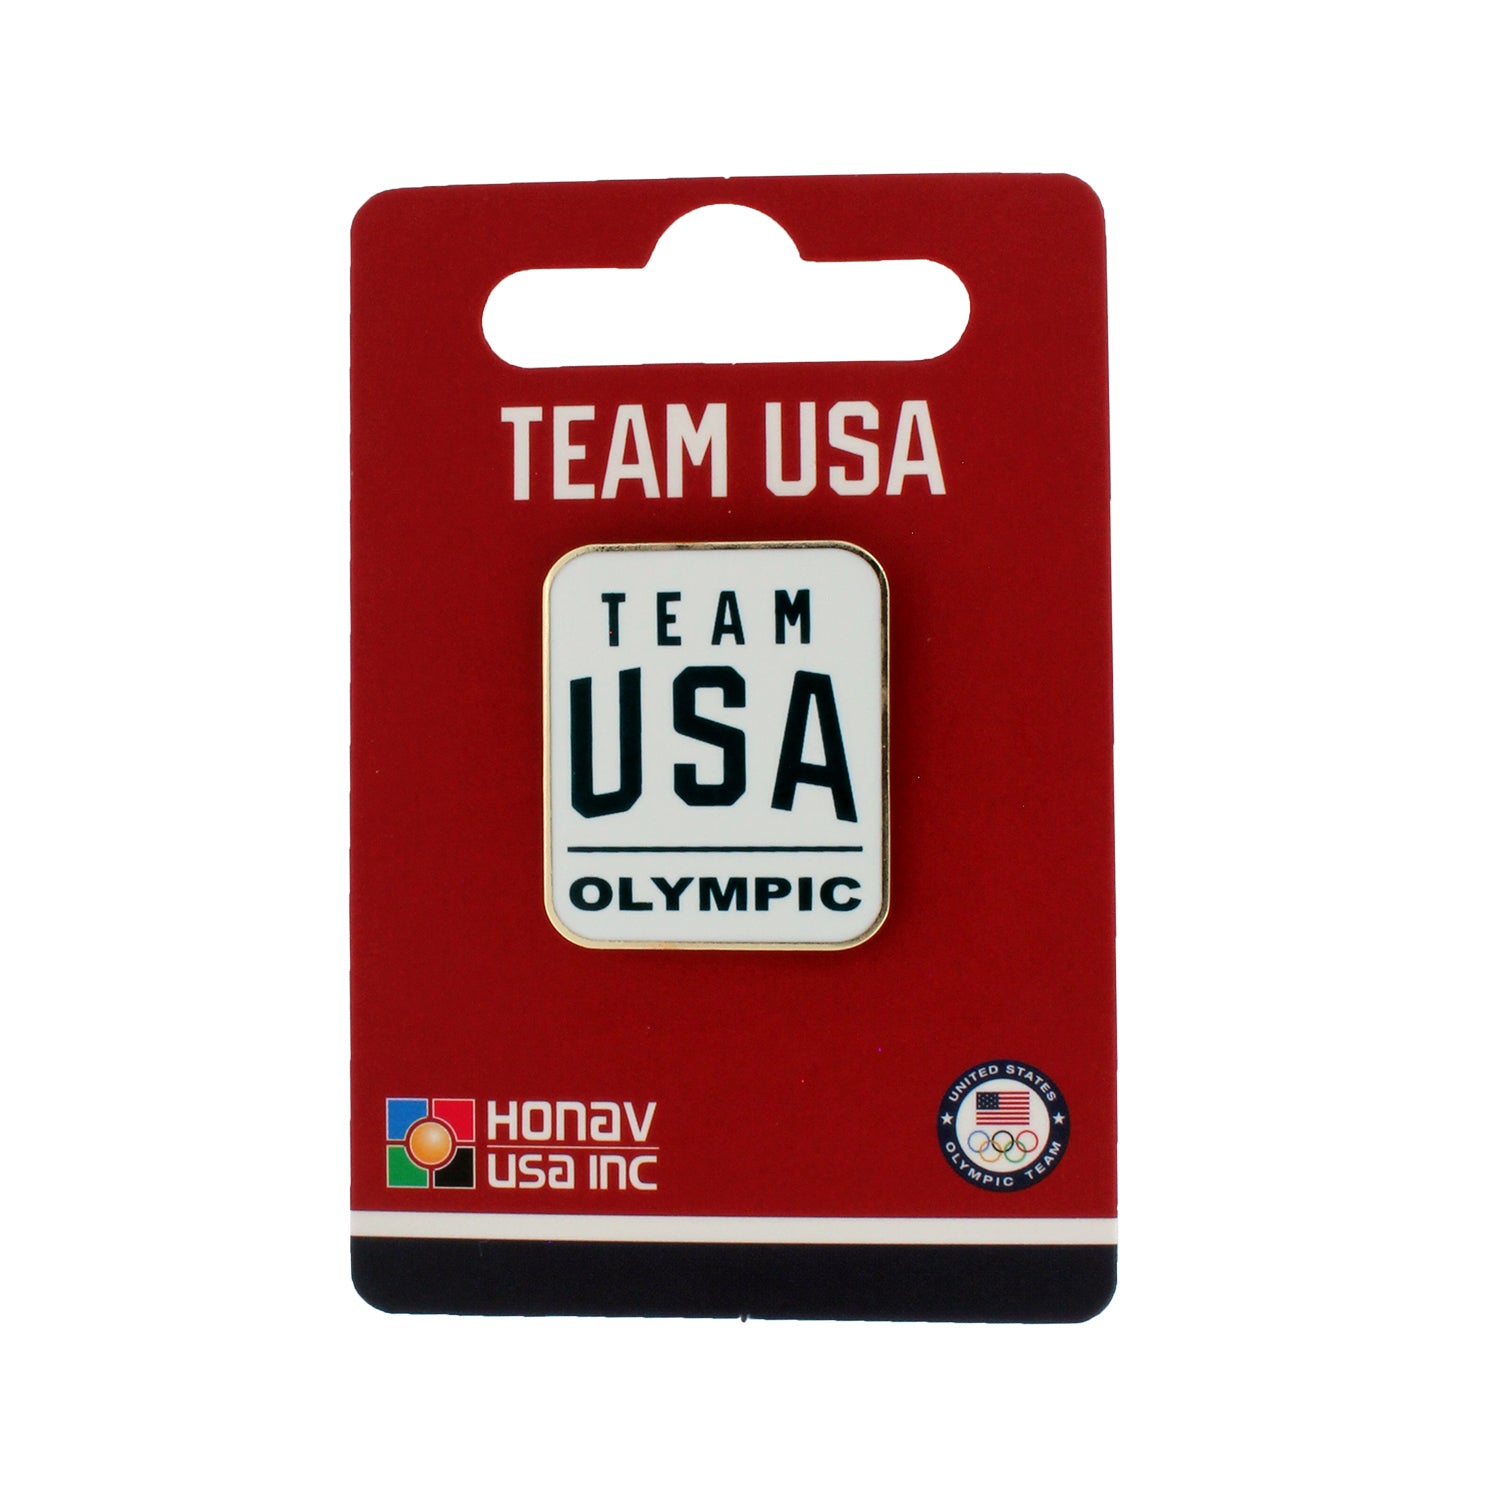 Team USA Olympics Pin in Blue and White